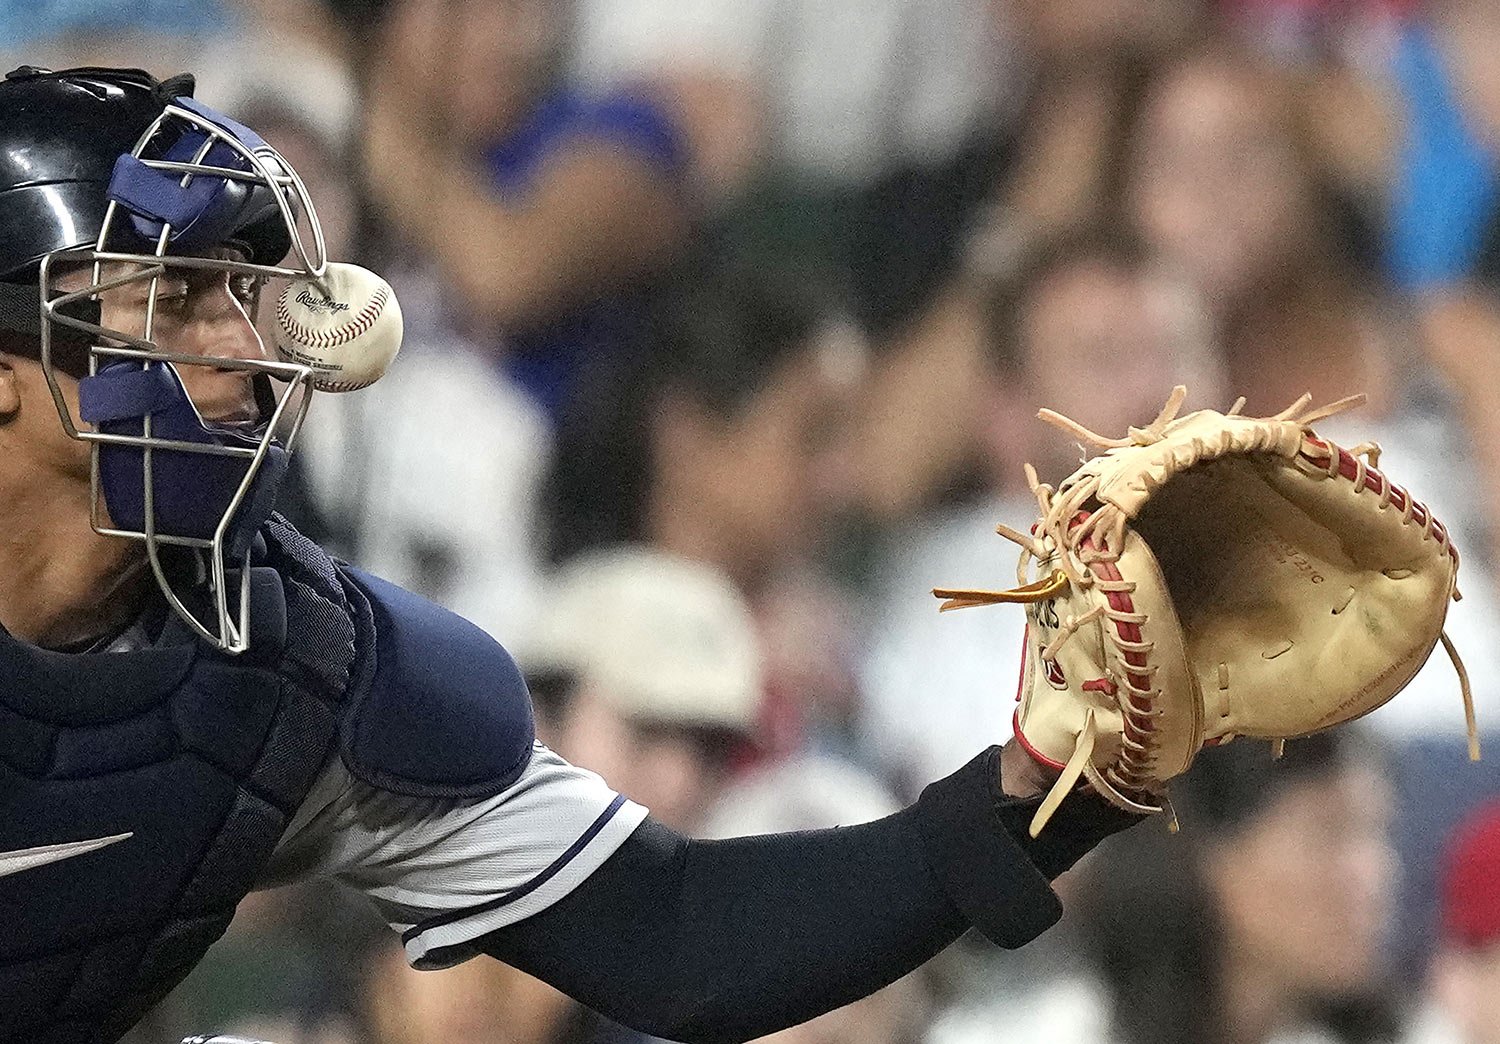  Cleveland Guardians catcher Bo Naylor is hit on his mask by a ball fouled off Chicago Cubs' Seiya Suzuki, in the fourth inning of a baseball game in Chicago, July 1, 202,. (AP Photo/Charles Rex Arbogast) 